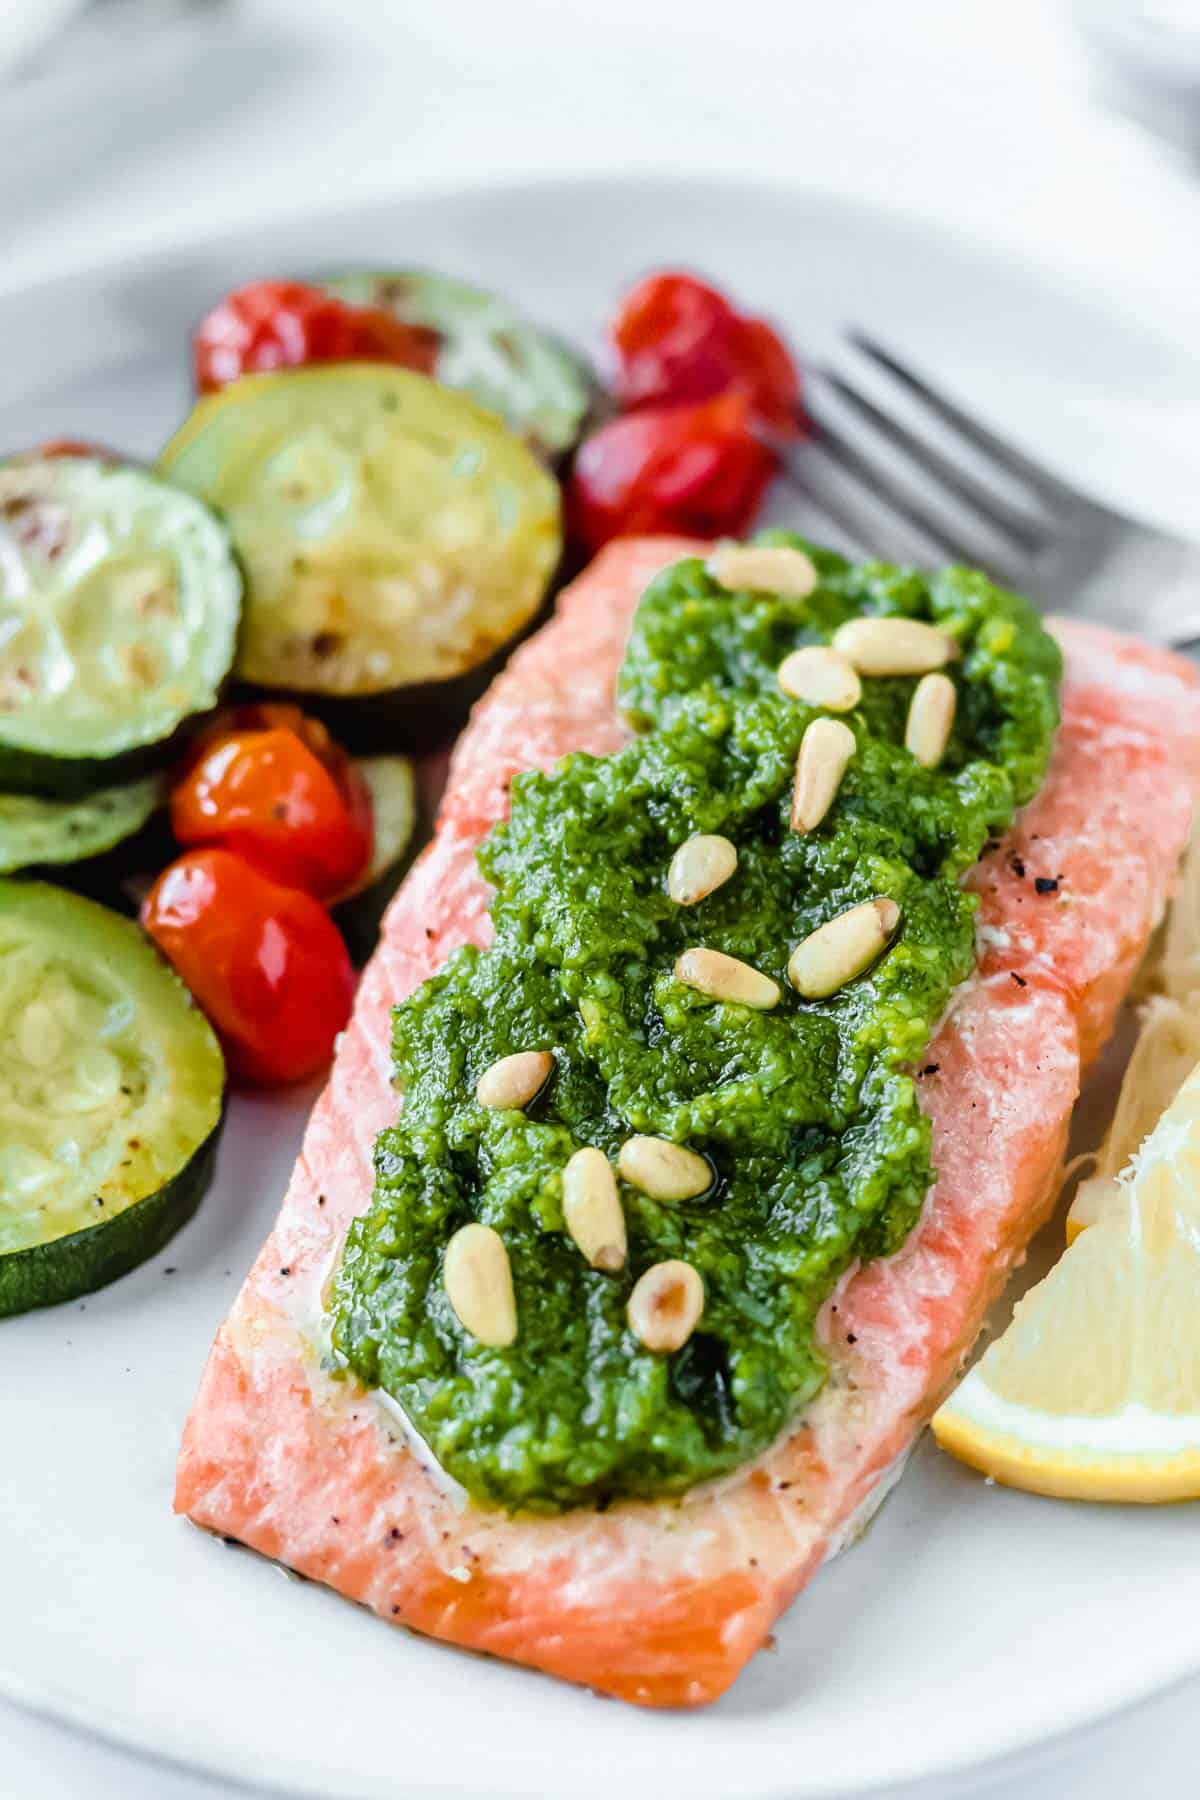 Baked Pesto Salmon on a white plate with lemon slices, zucchini and tomatoes